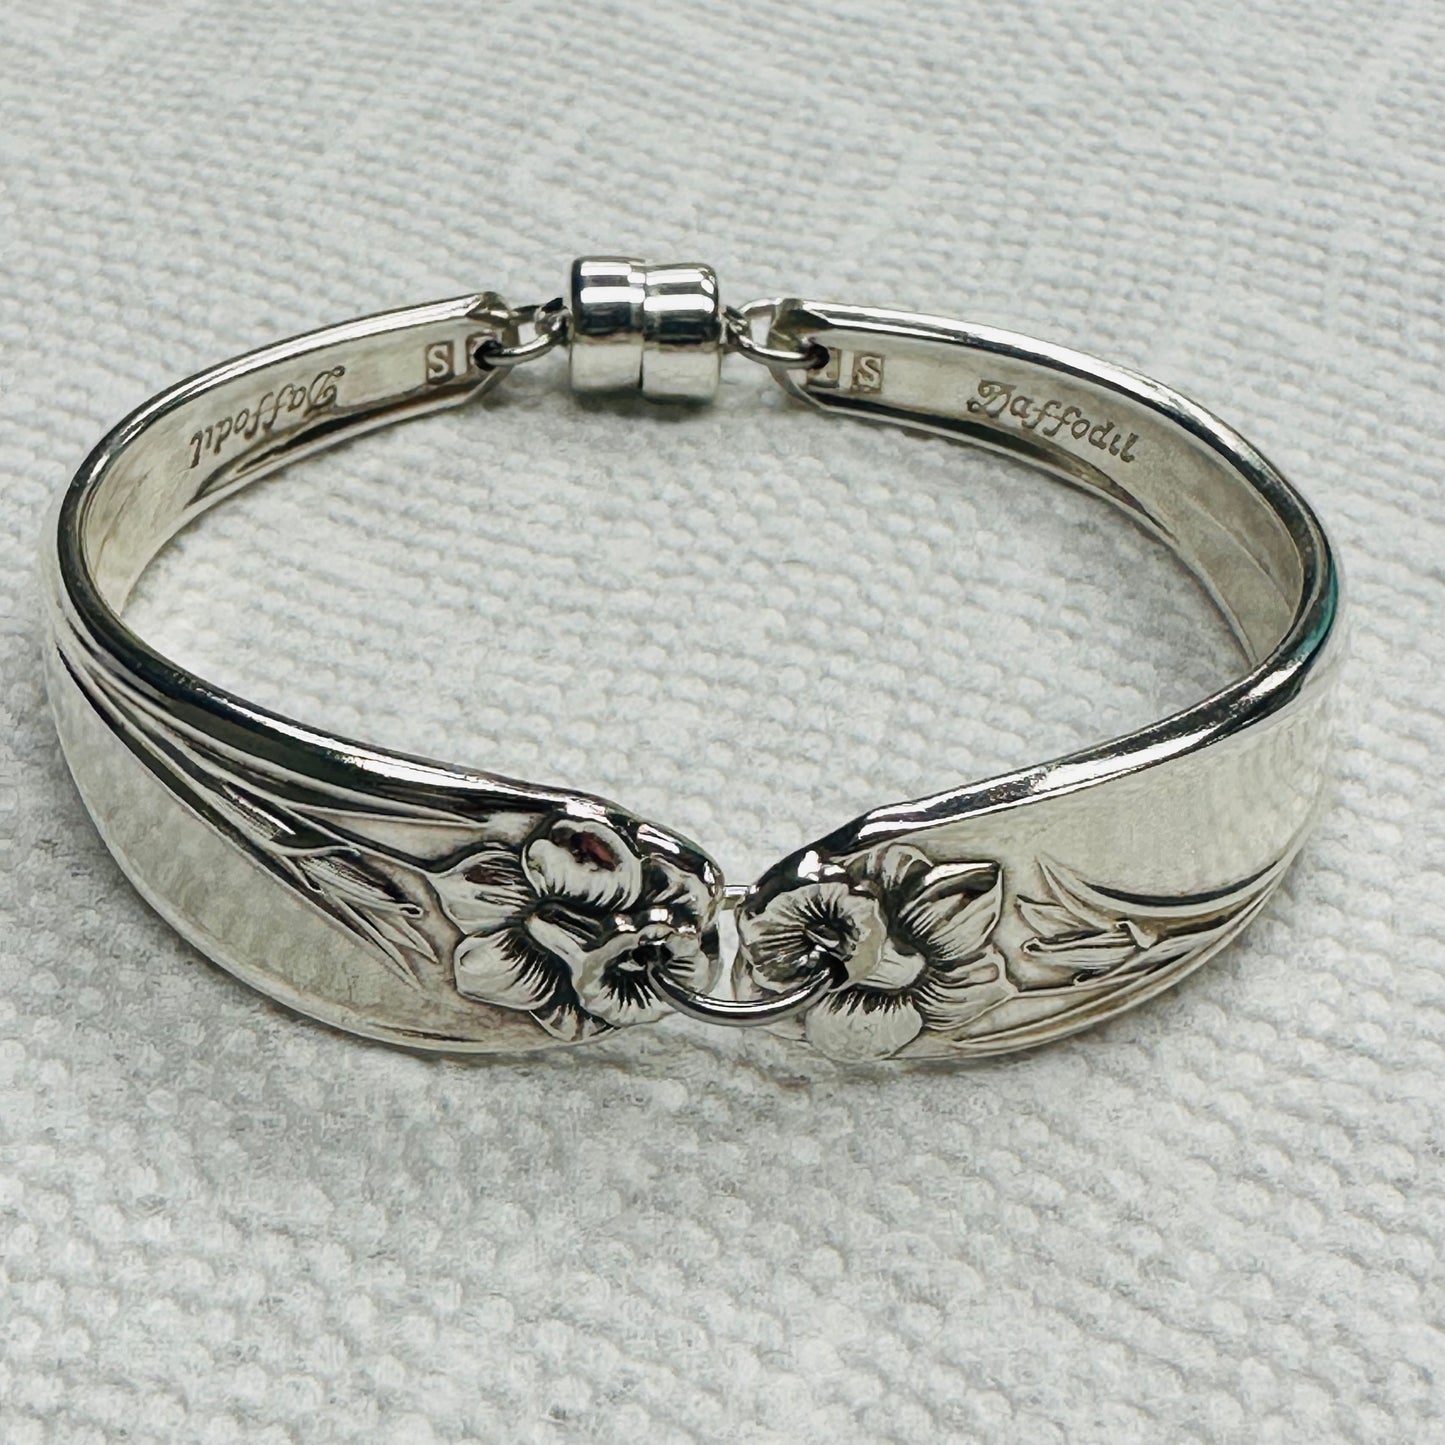 “Daffodil” 1950 Vintage Spoon Bracelet | Silverware | Upcycled | Antique March Birth Flower